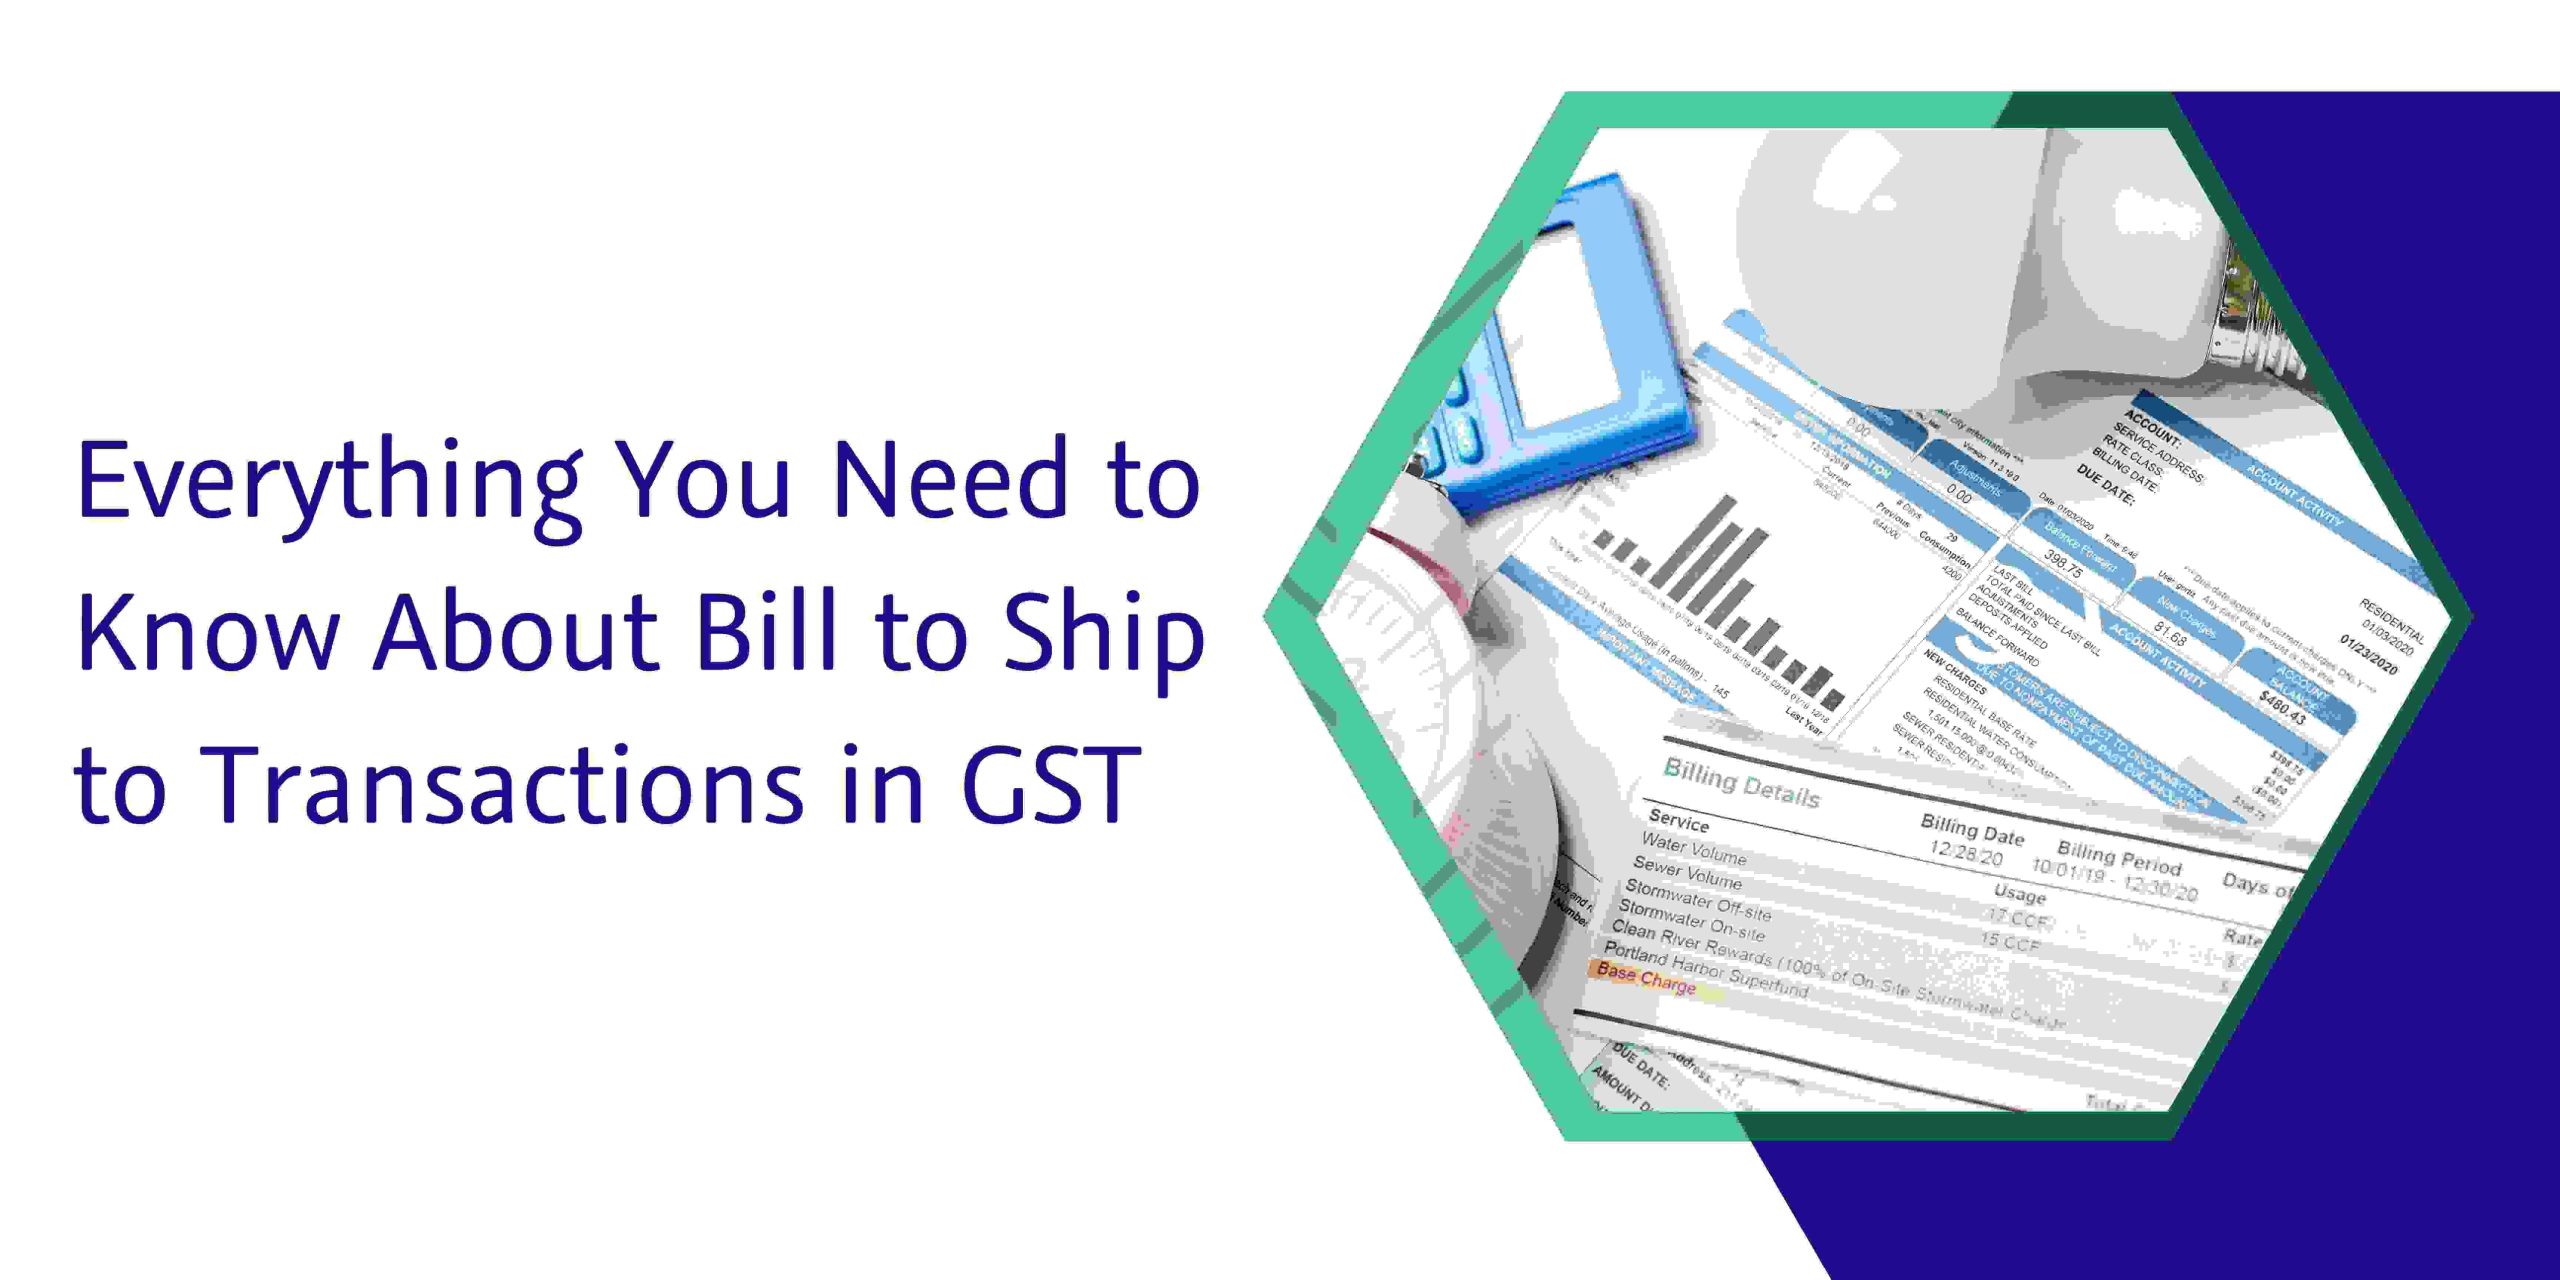 You are currently viewing Everything You Need to Know About Bill to Ship to Transactions in GST